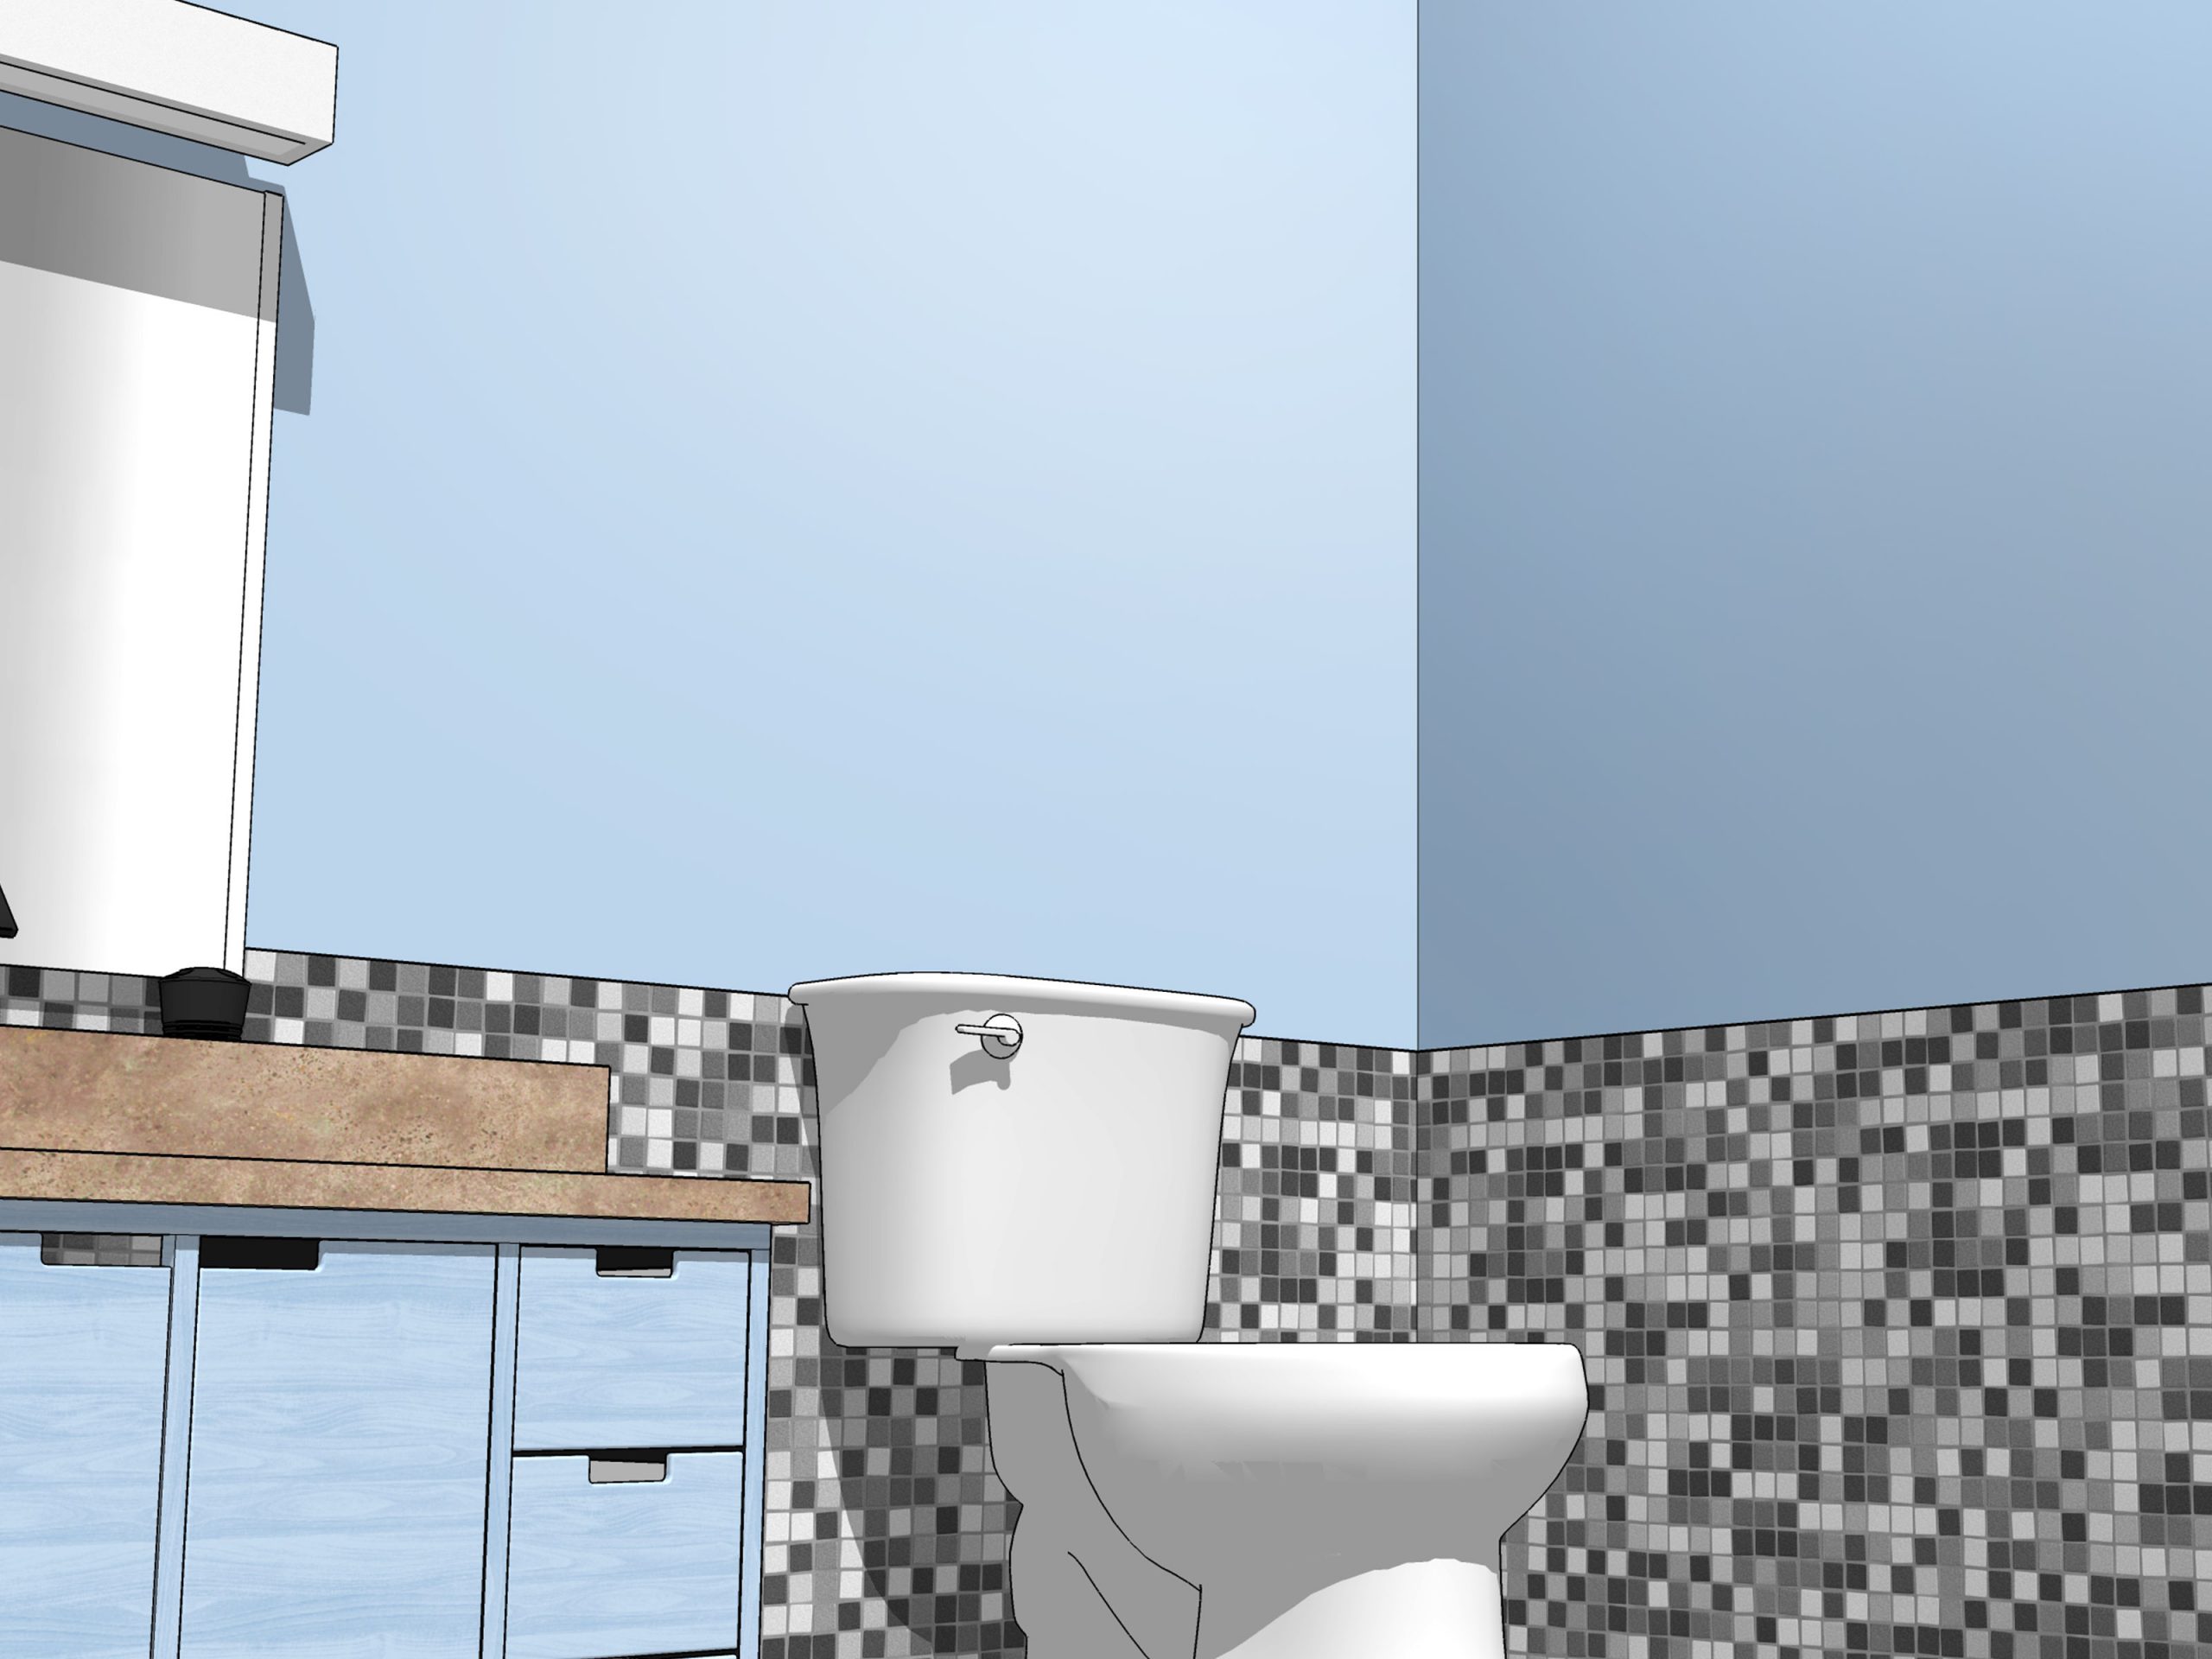 How to properly paint a bathroom
(pictures inside)